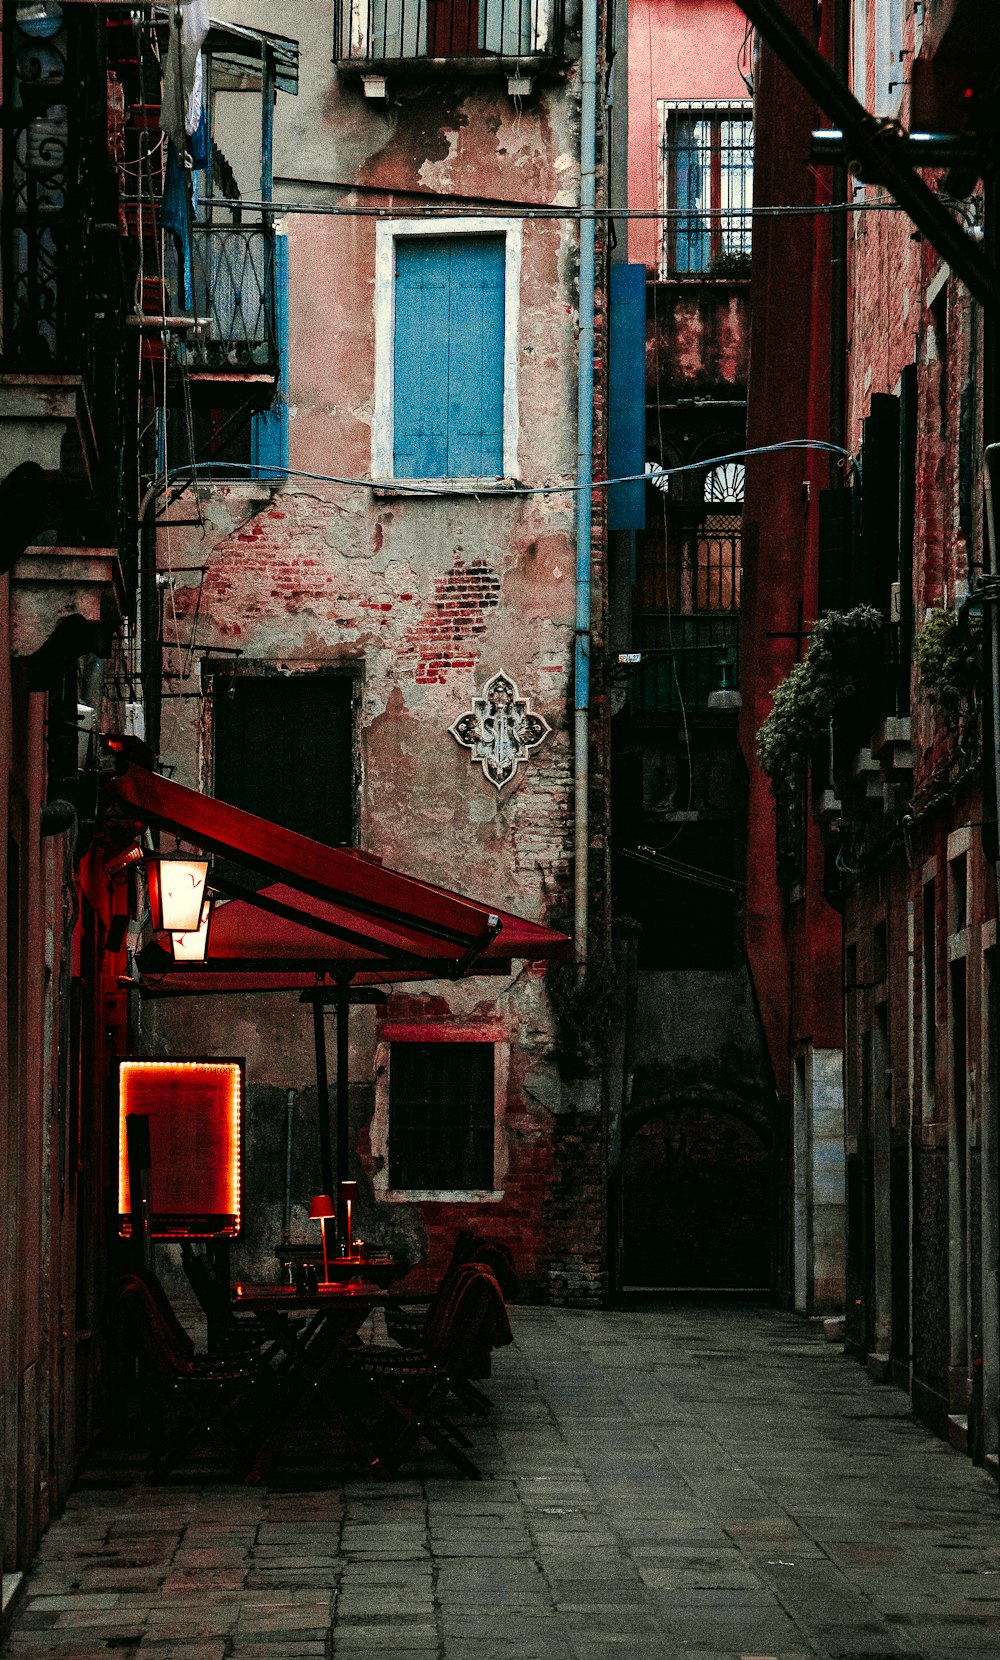 a narrow alleyway with a red awning